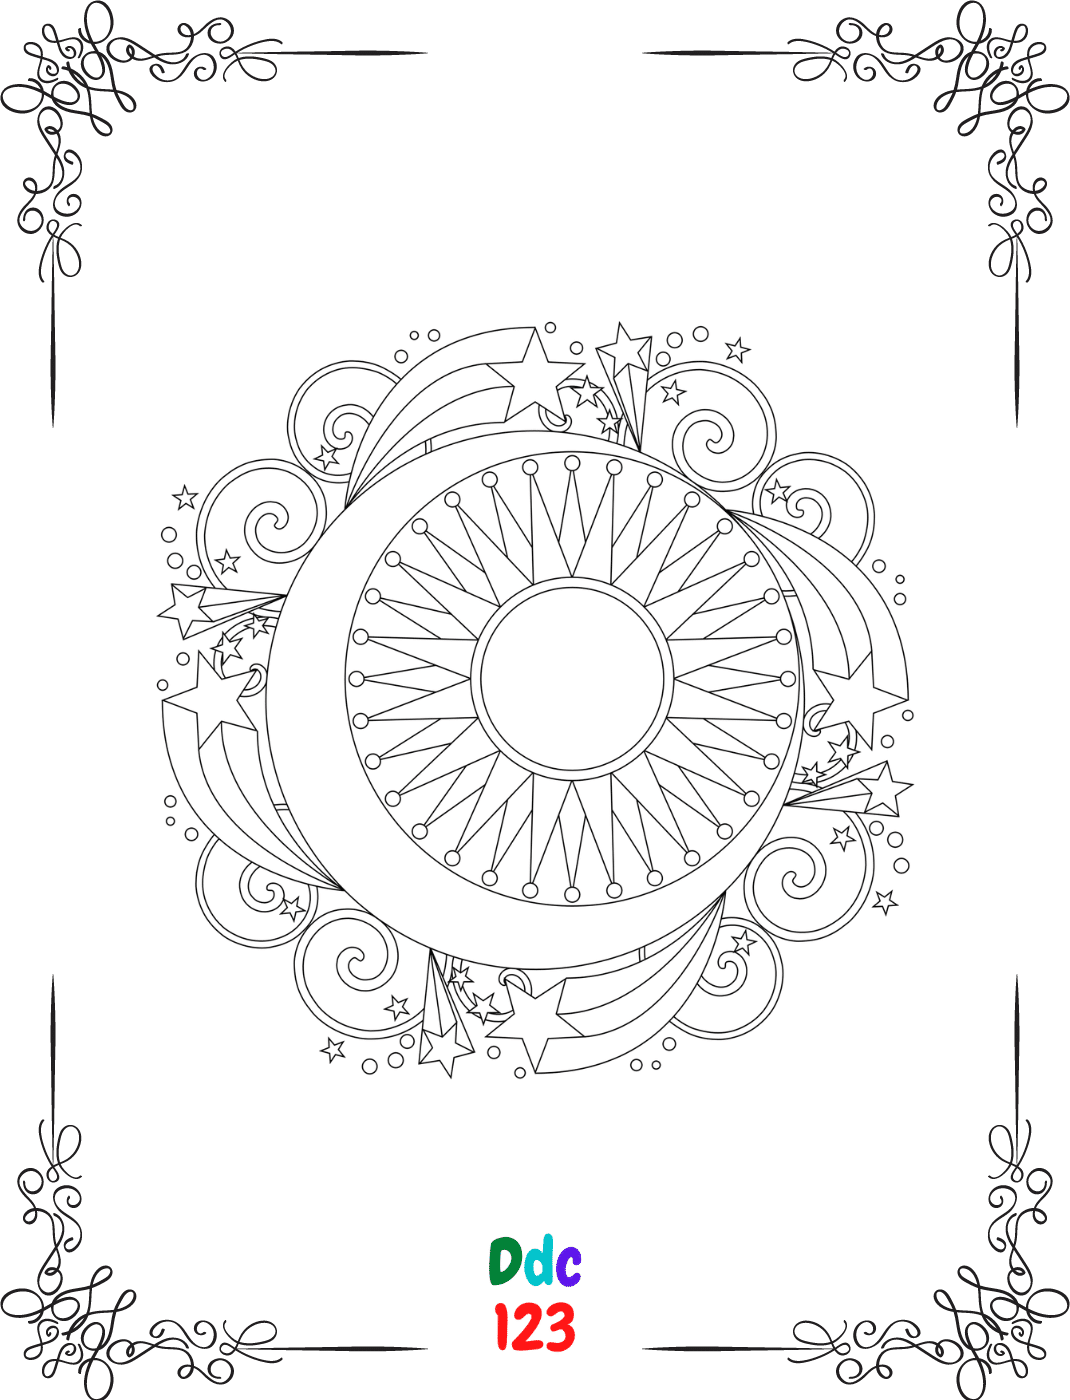 Mandala coloring pages for children - DDC123